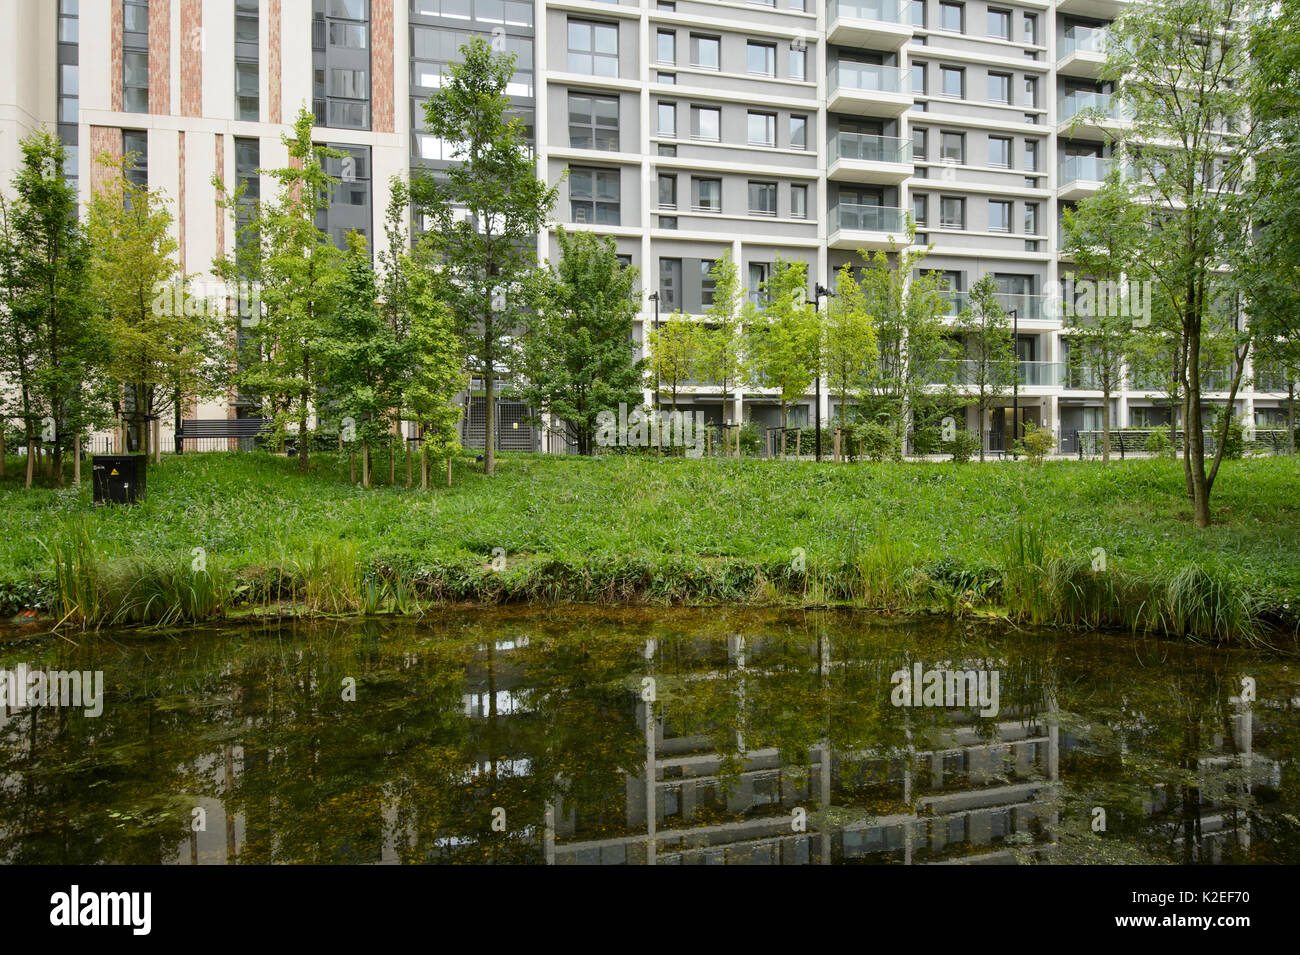 Environmental enrichment designed into housing estate, with wildlife pond and green space, East Village housing at site of Olympic Village, Stratford, London, UK 2014 Stock Photo